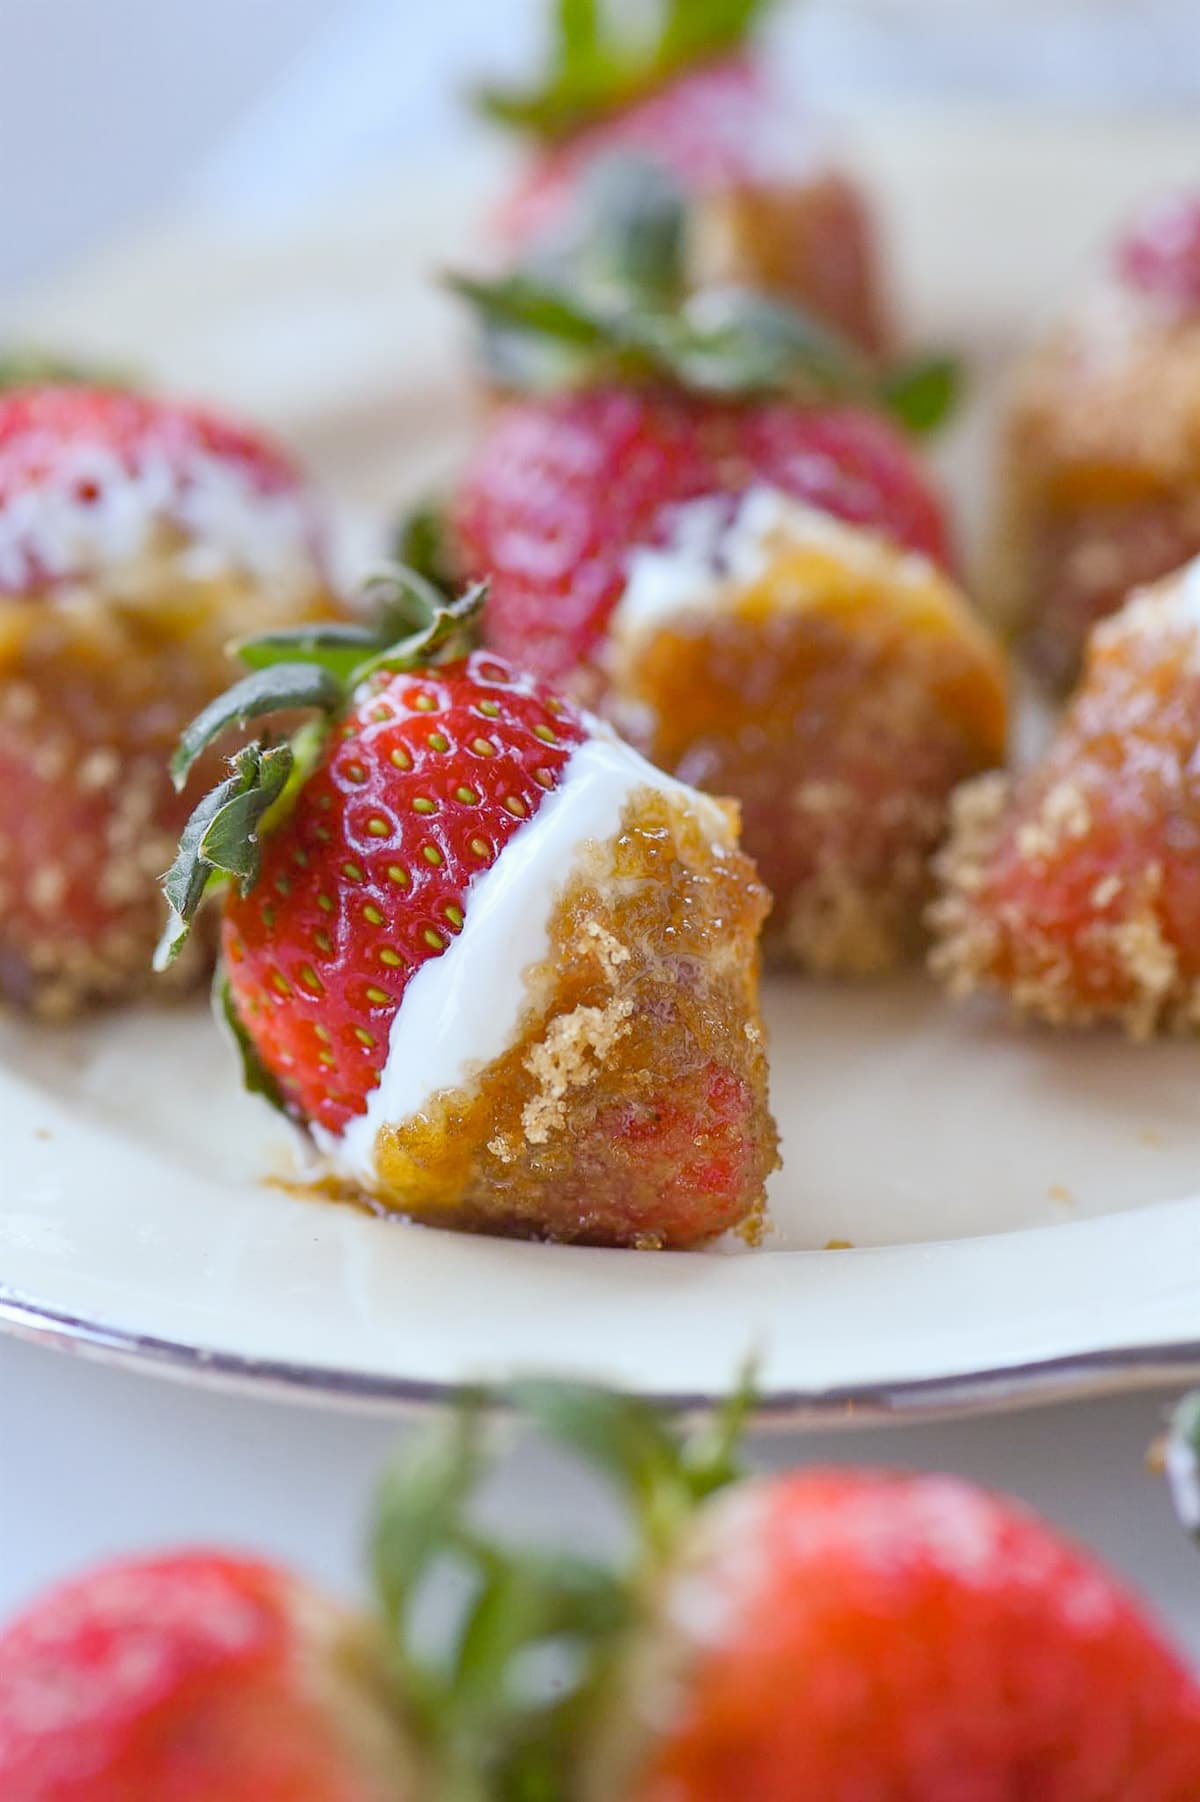 Strawberry dipped in sour cream and brown sugar